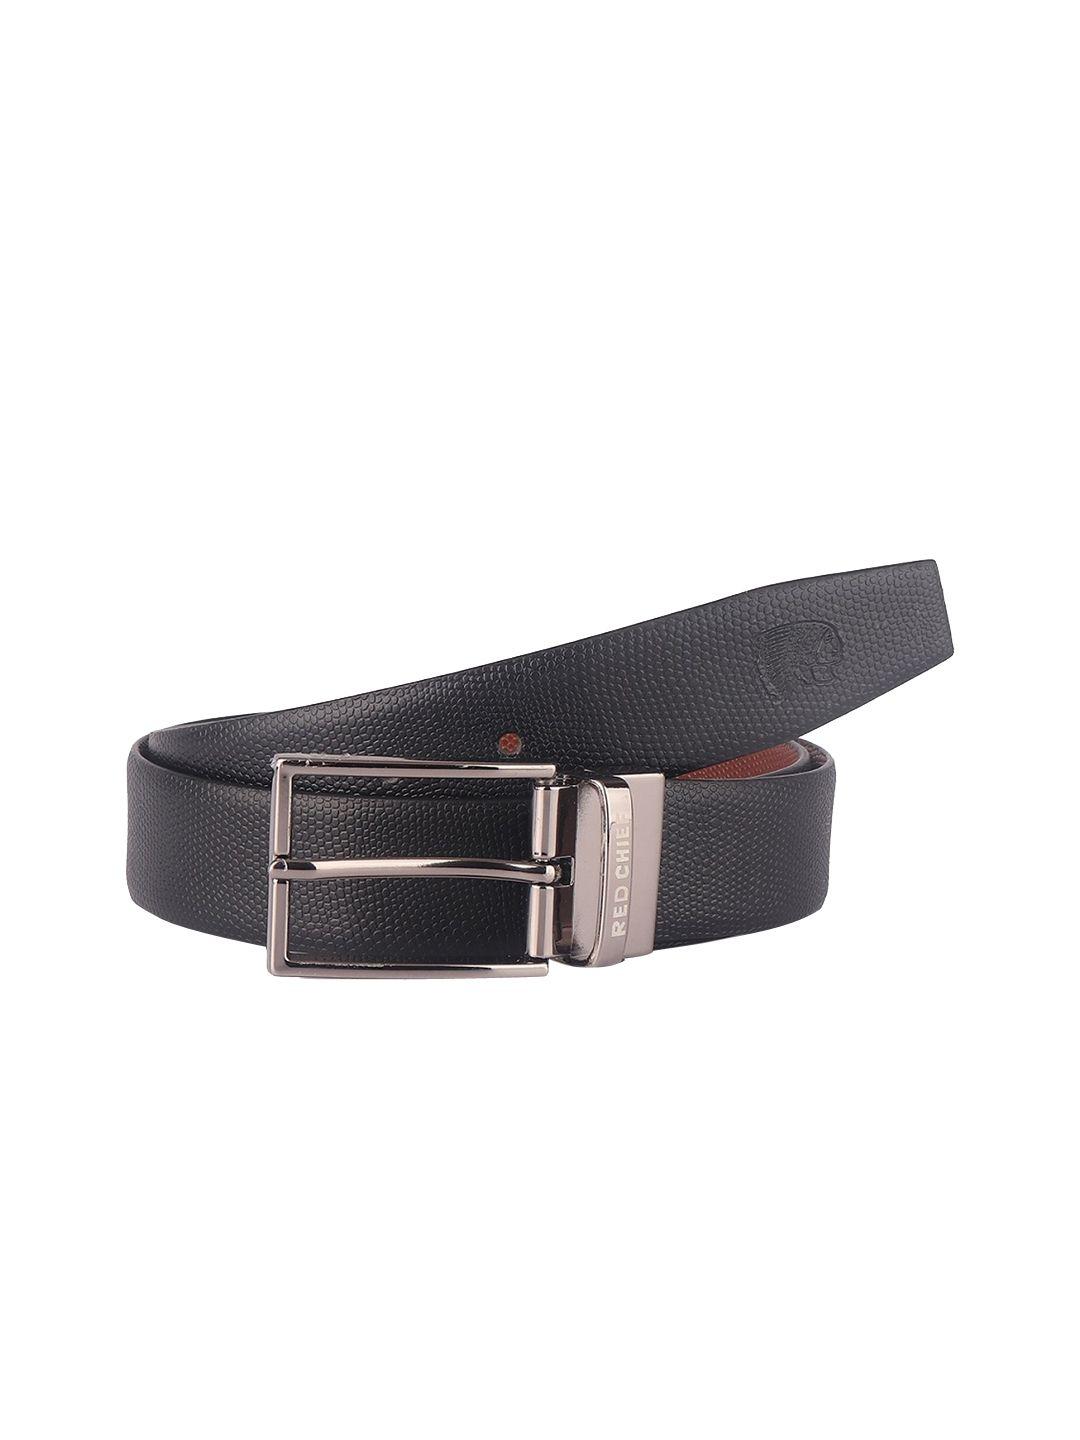 red chief men tan textured leather formal reversible belt